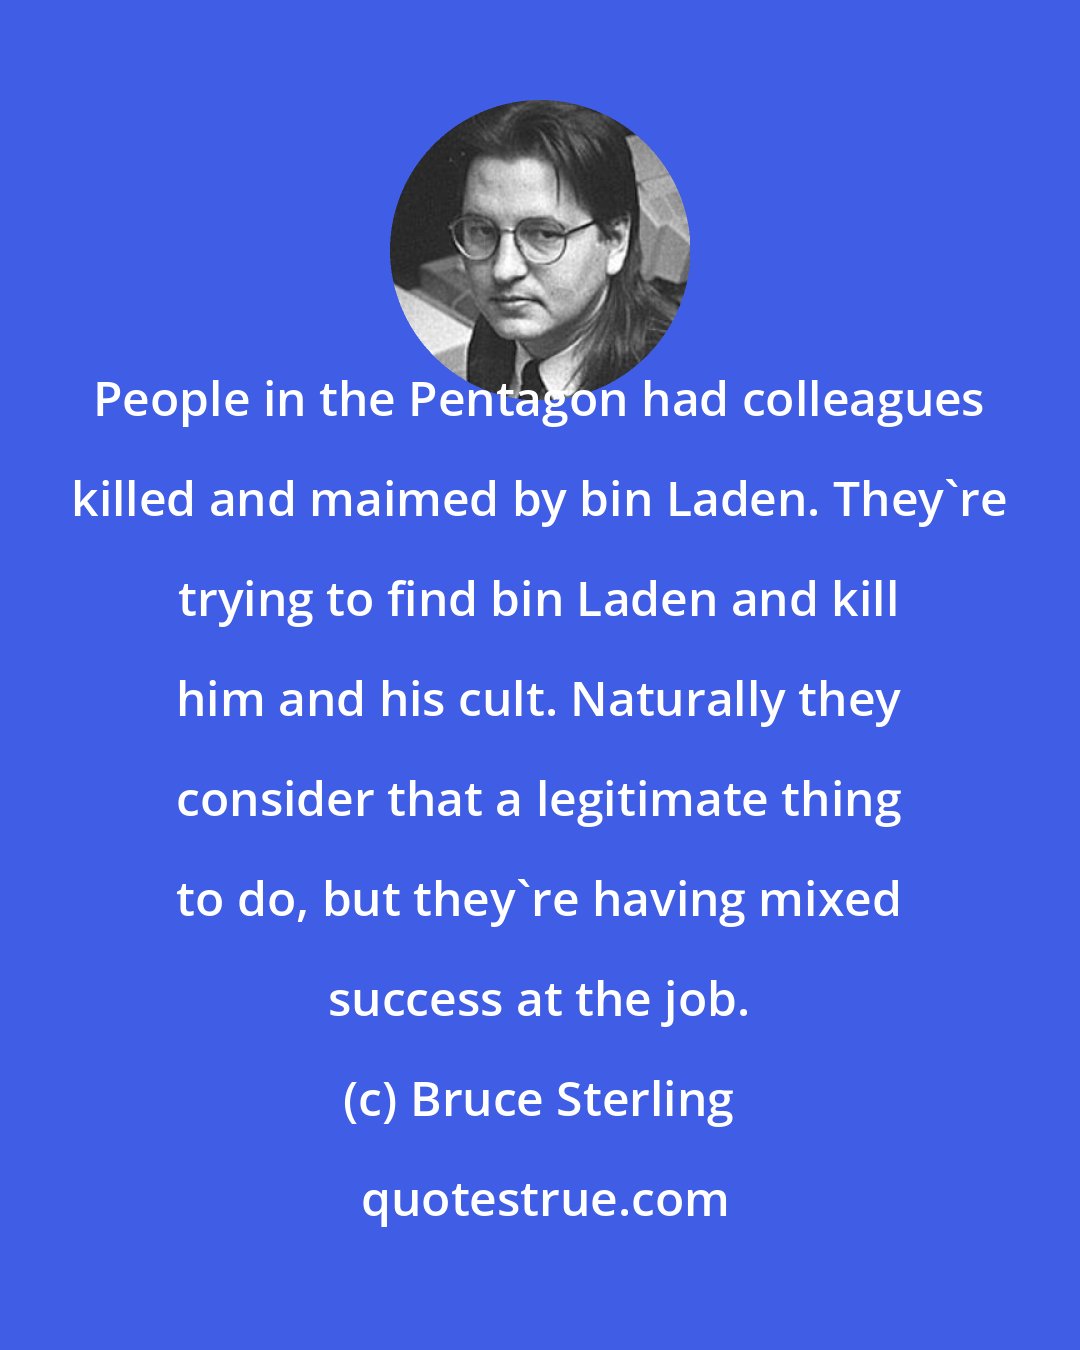 Bruce Sterling: People in the Pentagon had colleagues killed and maimed by bin Laden. They're trying to find bin Laden and kill him and his cult. Naturally they consider that a legitimate thing to do, but they're having mixed success at the job.